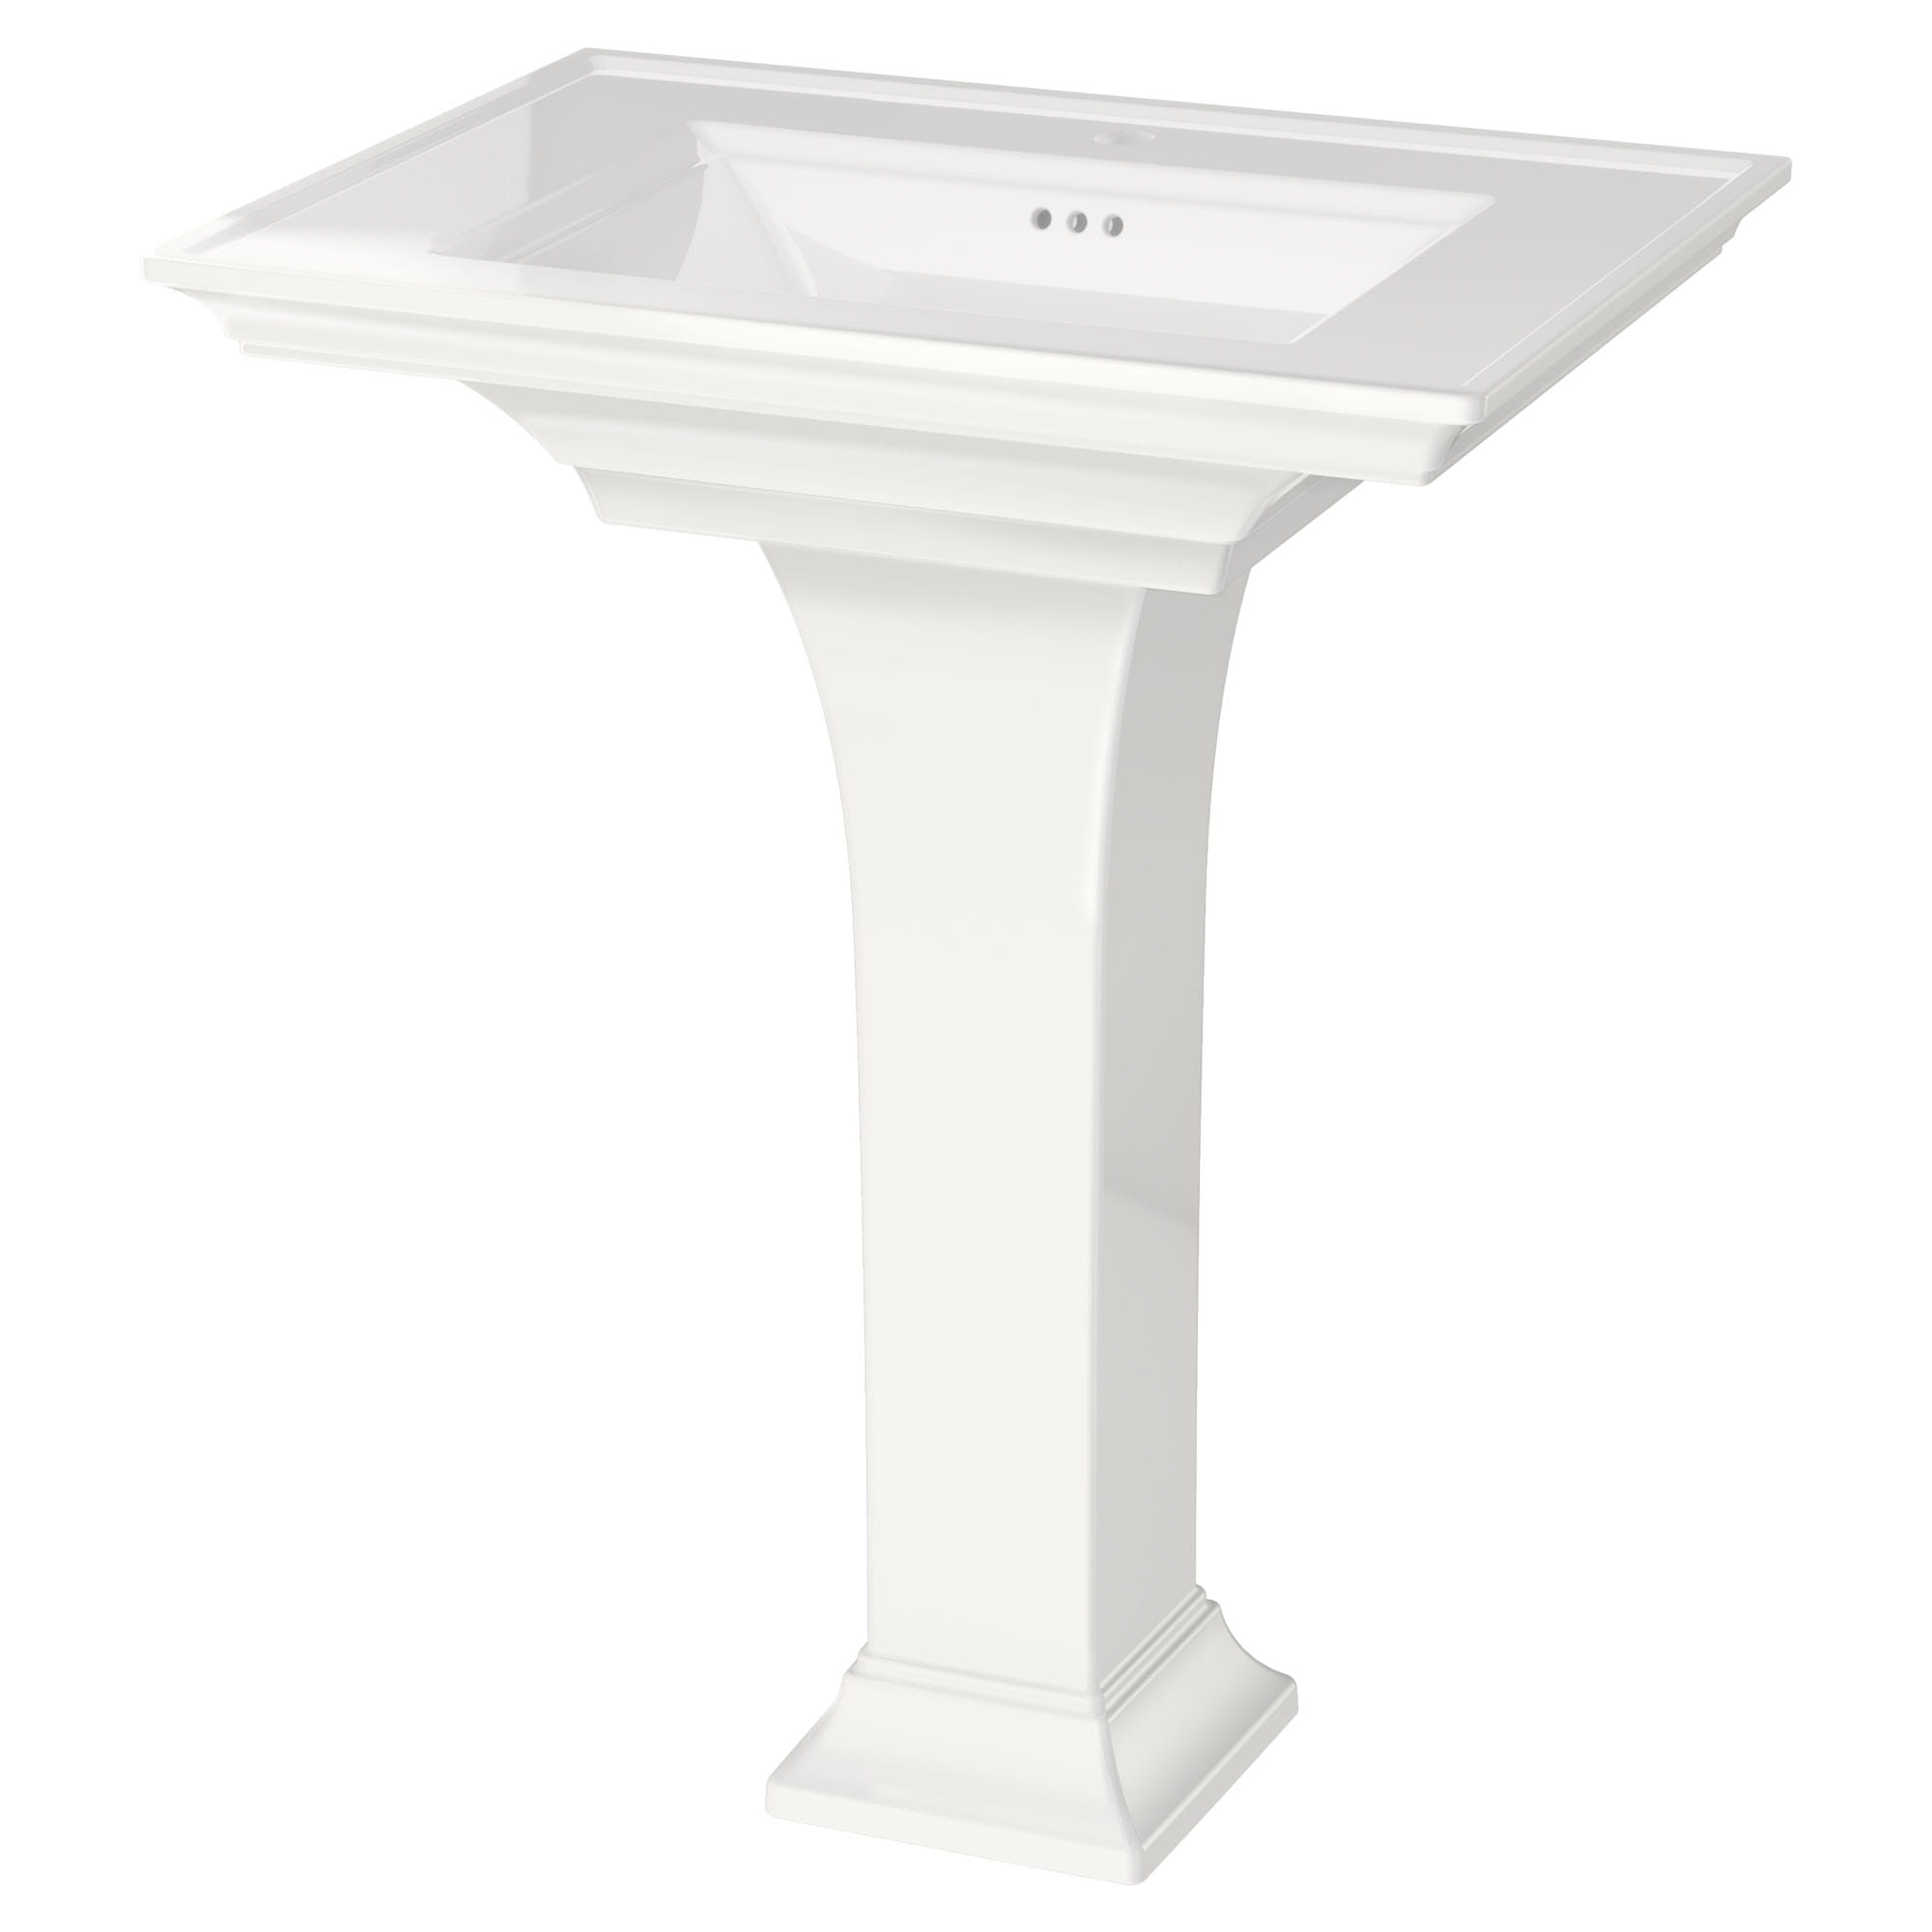 Town Square S Center Hole Only Pedestal Sink Top and Leg Combination WHITE